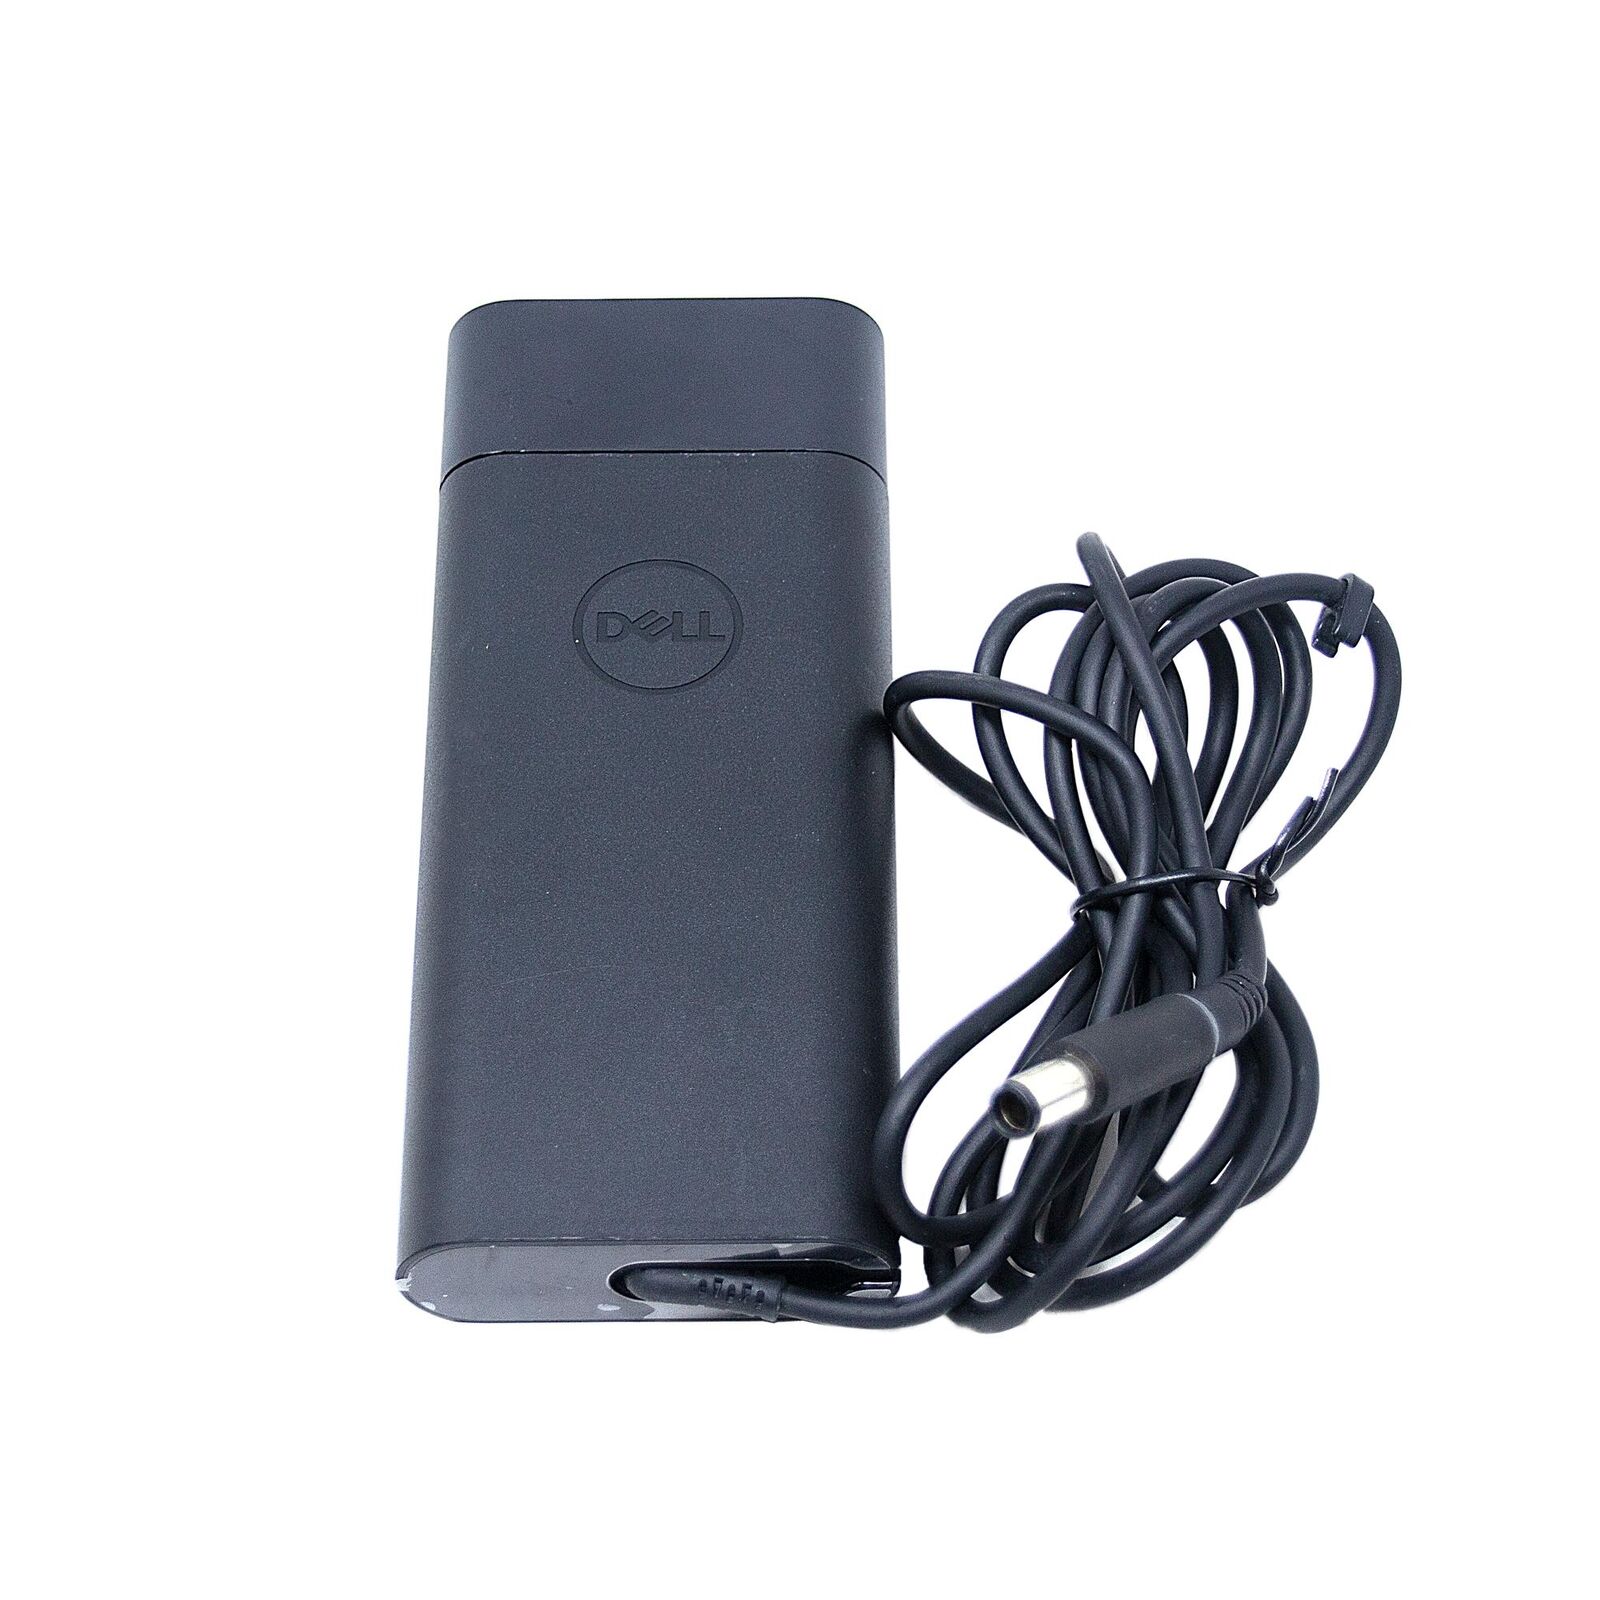 DELL Latitude D820 PP04X Genuine Original AC Power Adapter Charger